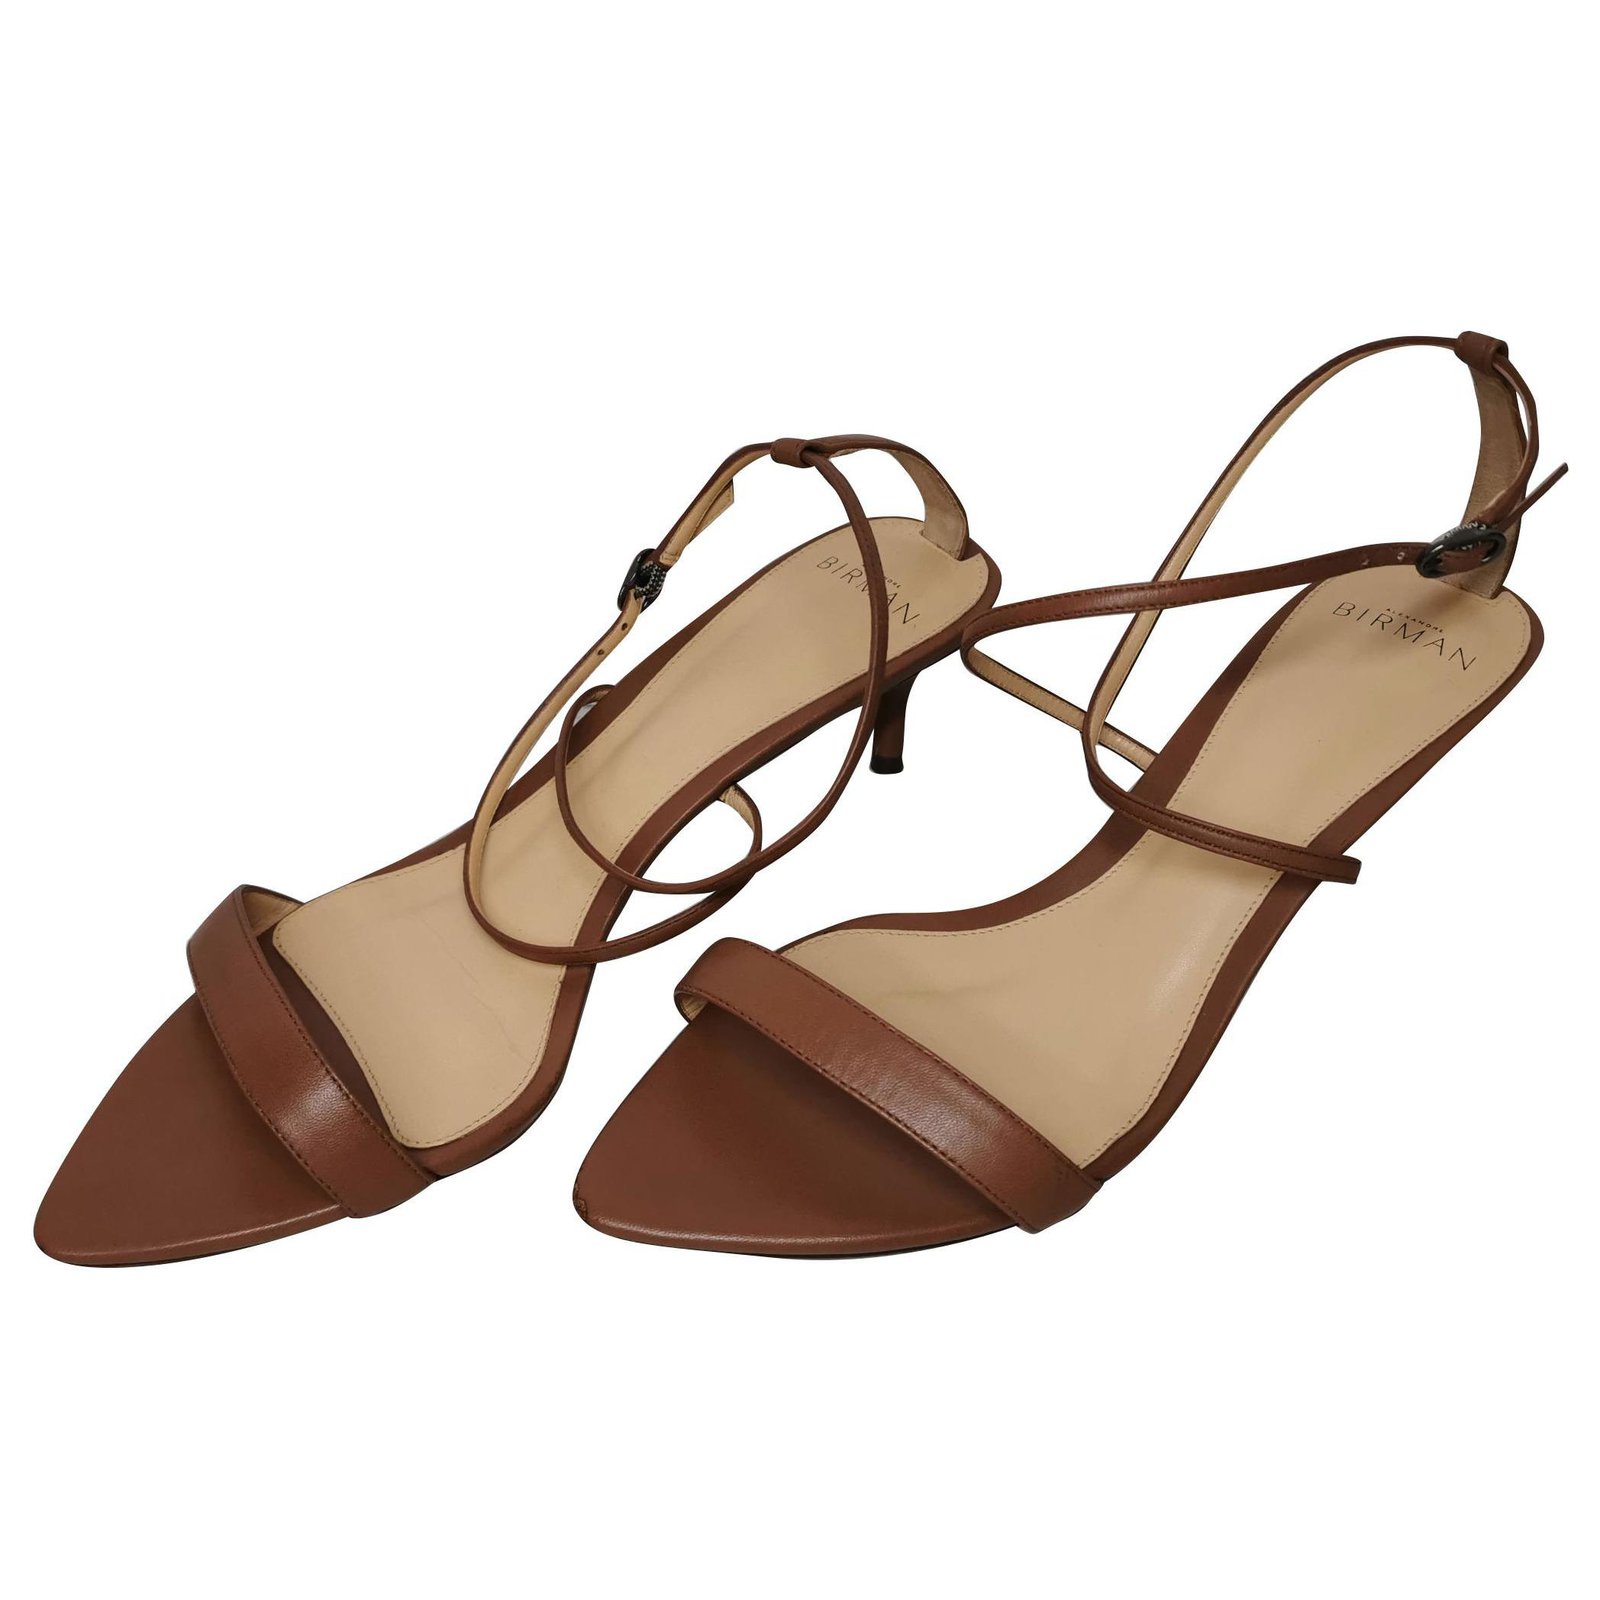 NEW! ROOLEE Strappy Women's Comfort Sandals Light Brown Leather Size 38/6.5  New | eBay